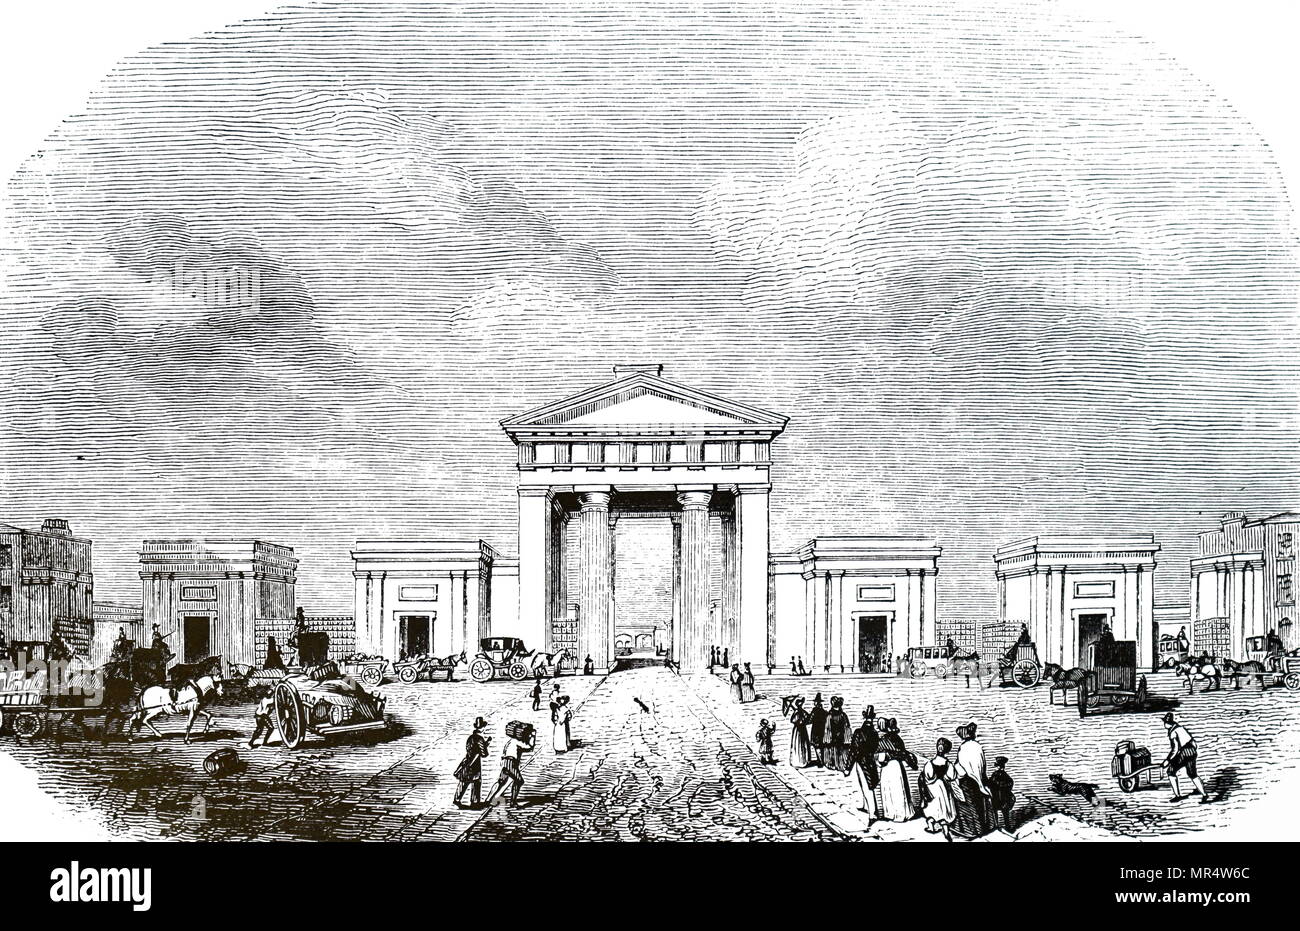 Engraving depicting Euston Arch, the original entrance to Euston station facing onto Drummond Street, London. Designed by Philip Hardwick (1792-1870) an English architect. Dated 19th century Stock Photo